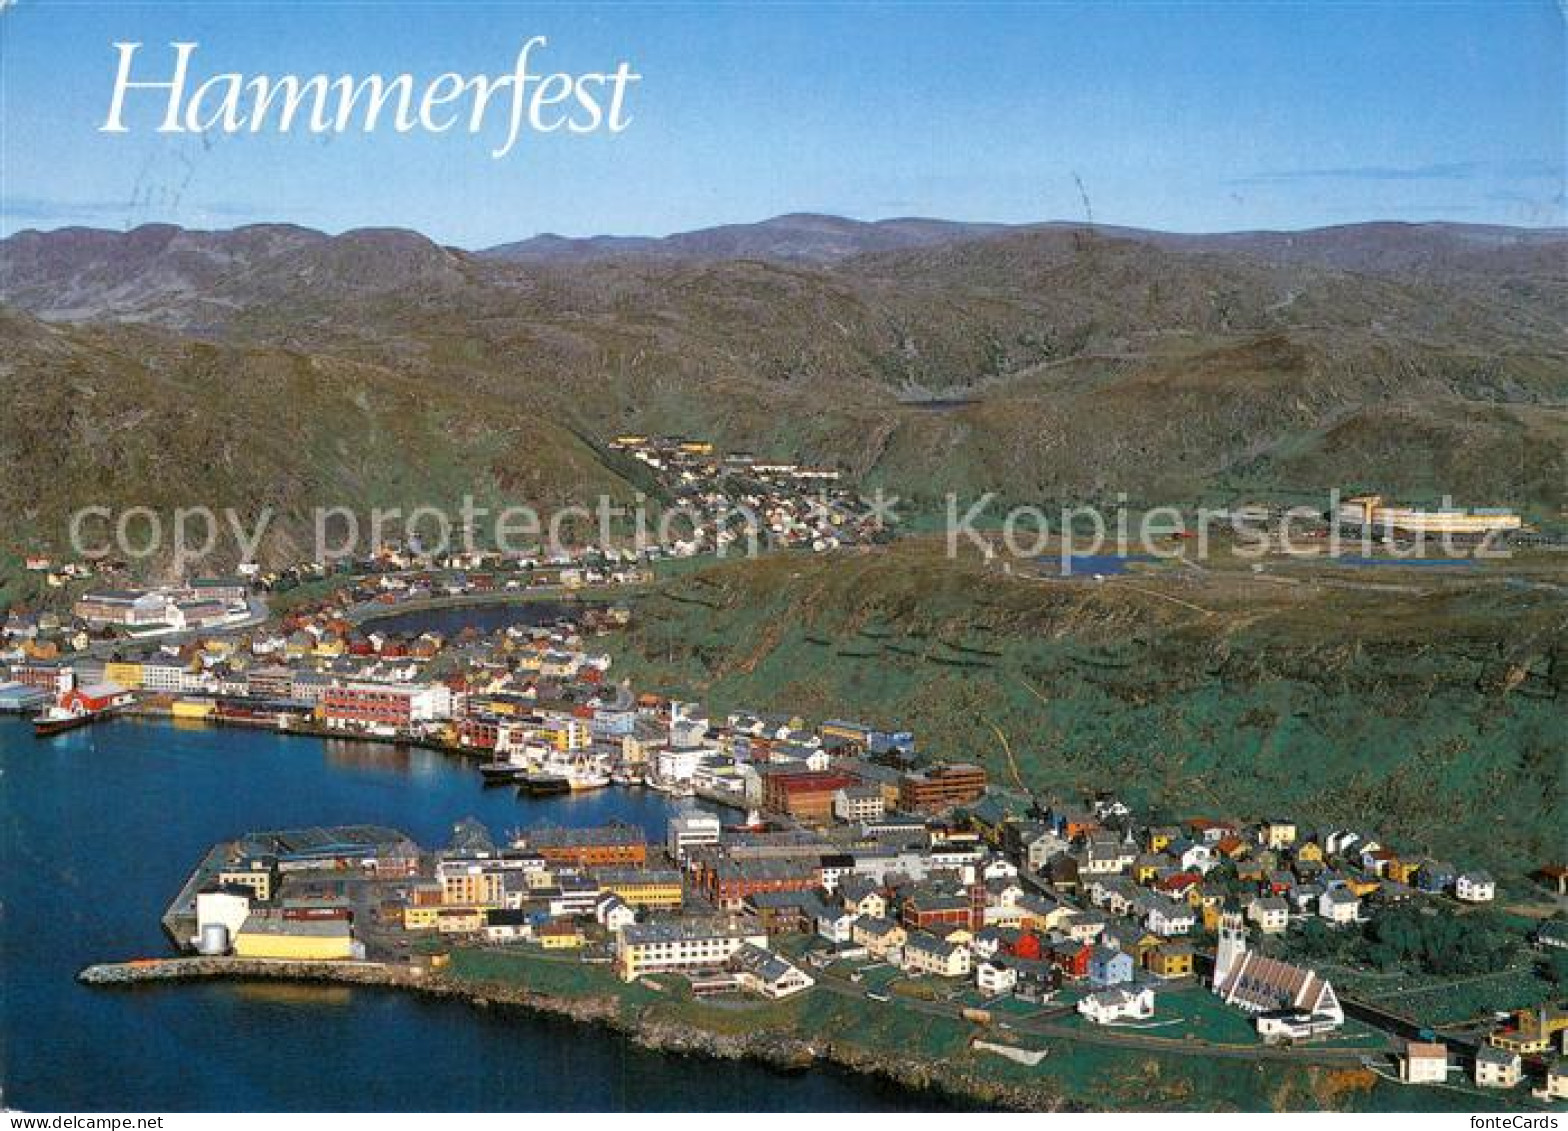 73714796 Hammerfest The Northernmost Town In The World Hammerfest - Norvège